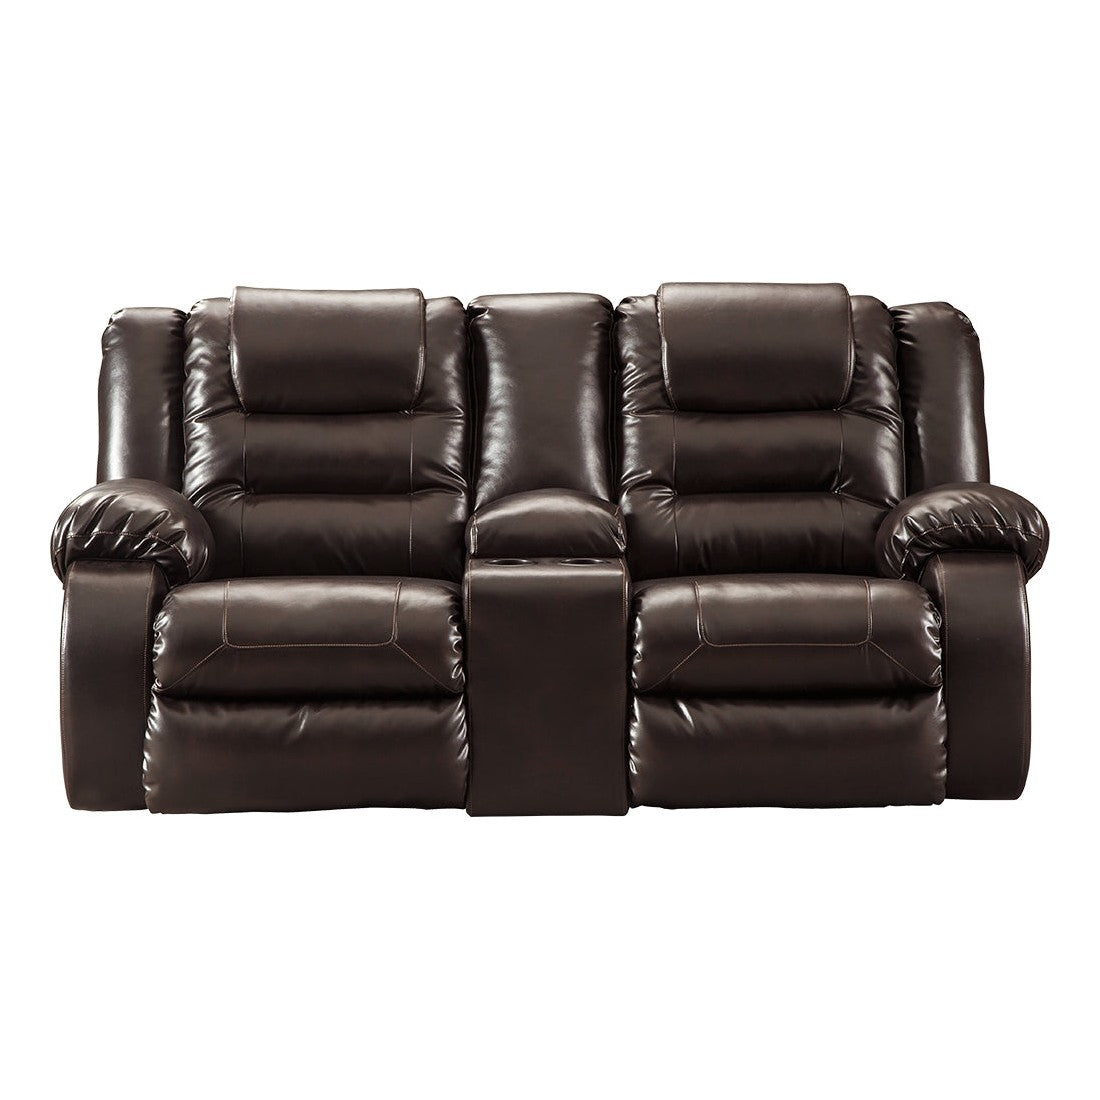 Vacherie Reclining Loveseat with Console Ash-7930794